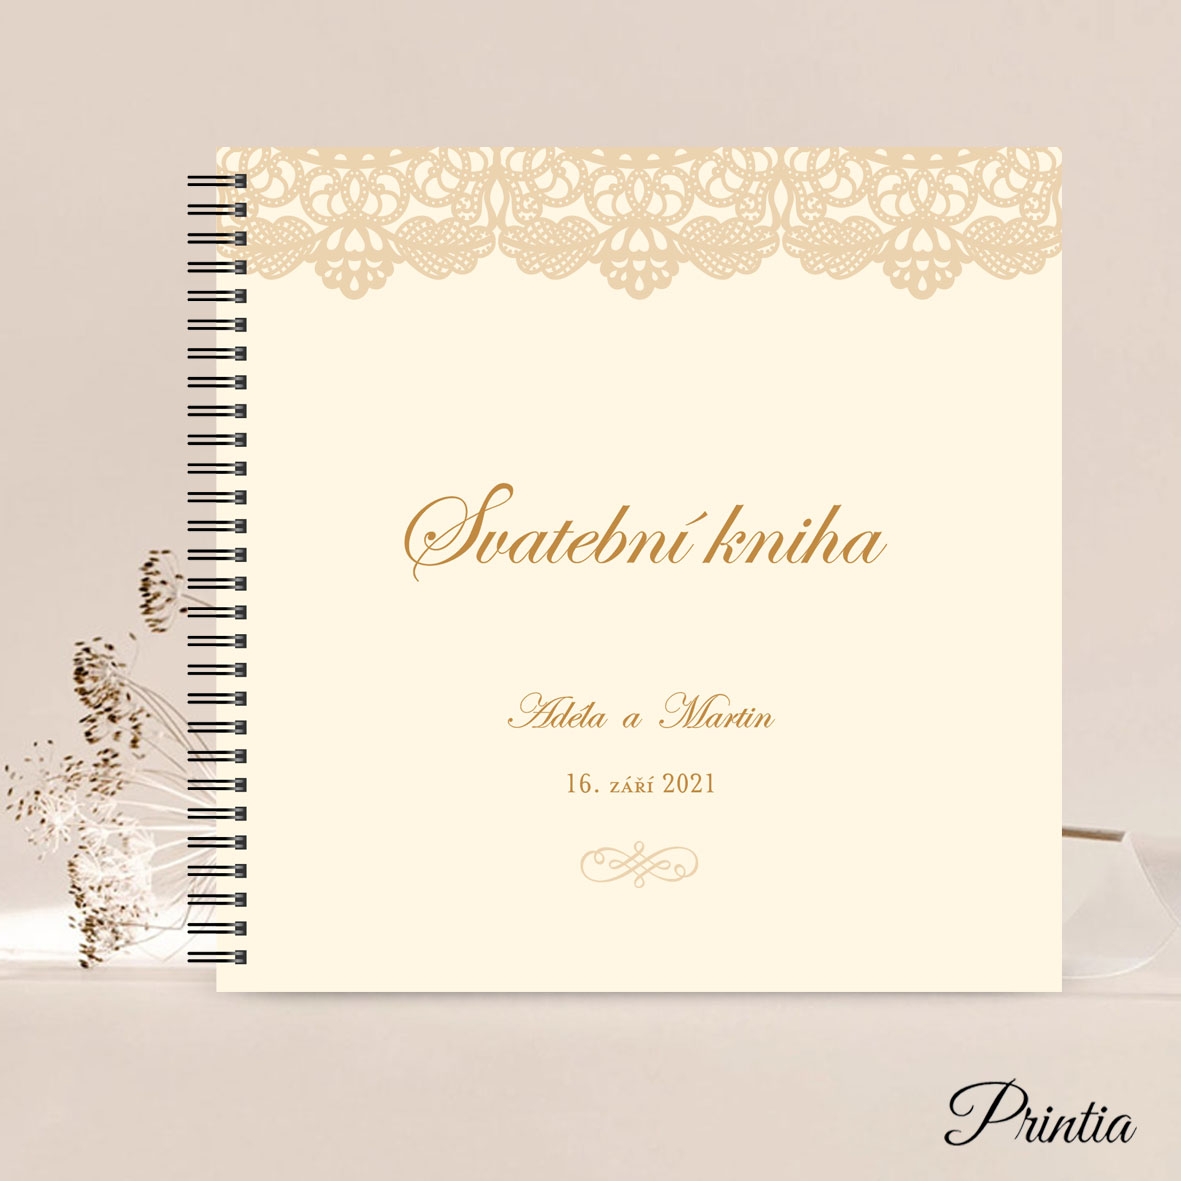 Square wedding book with printed lace ornament